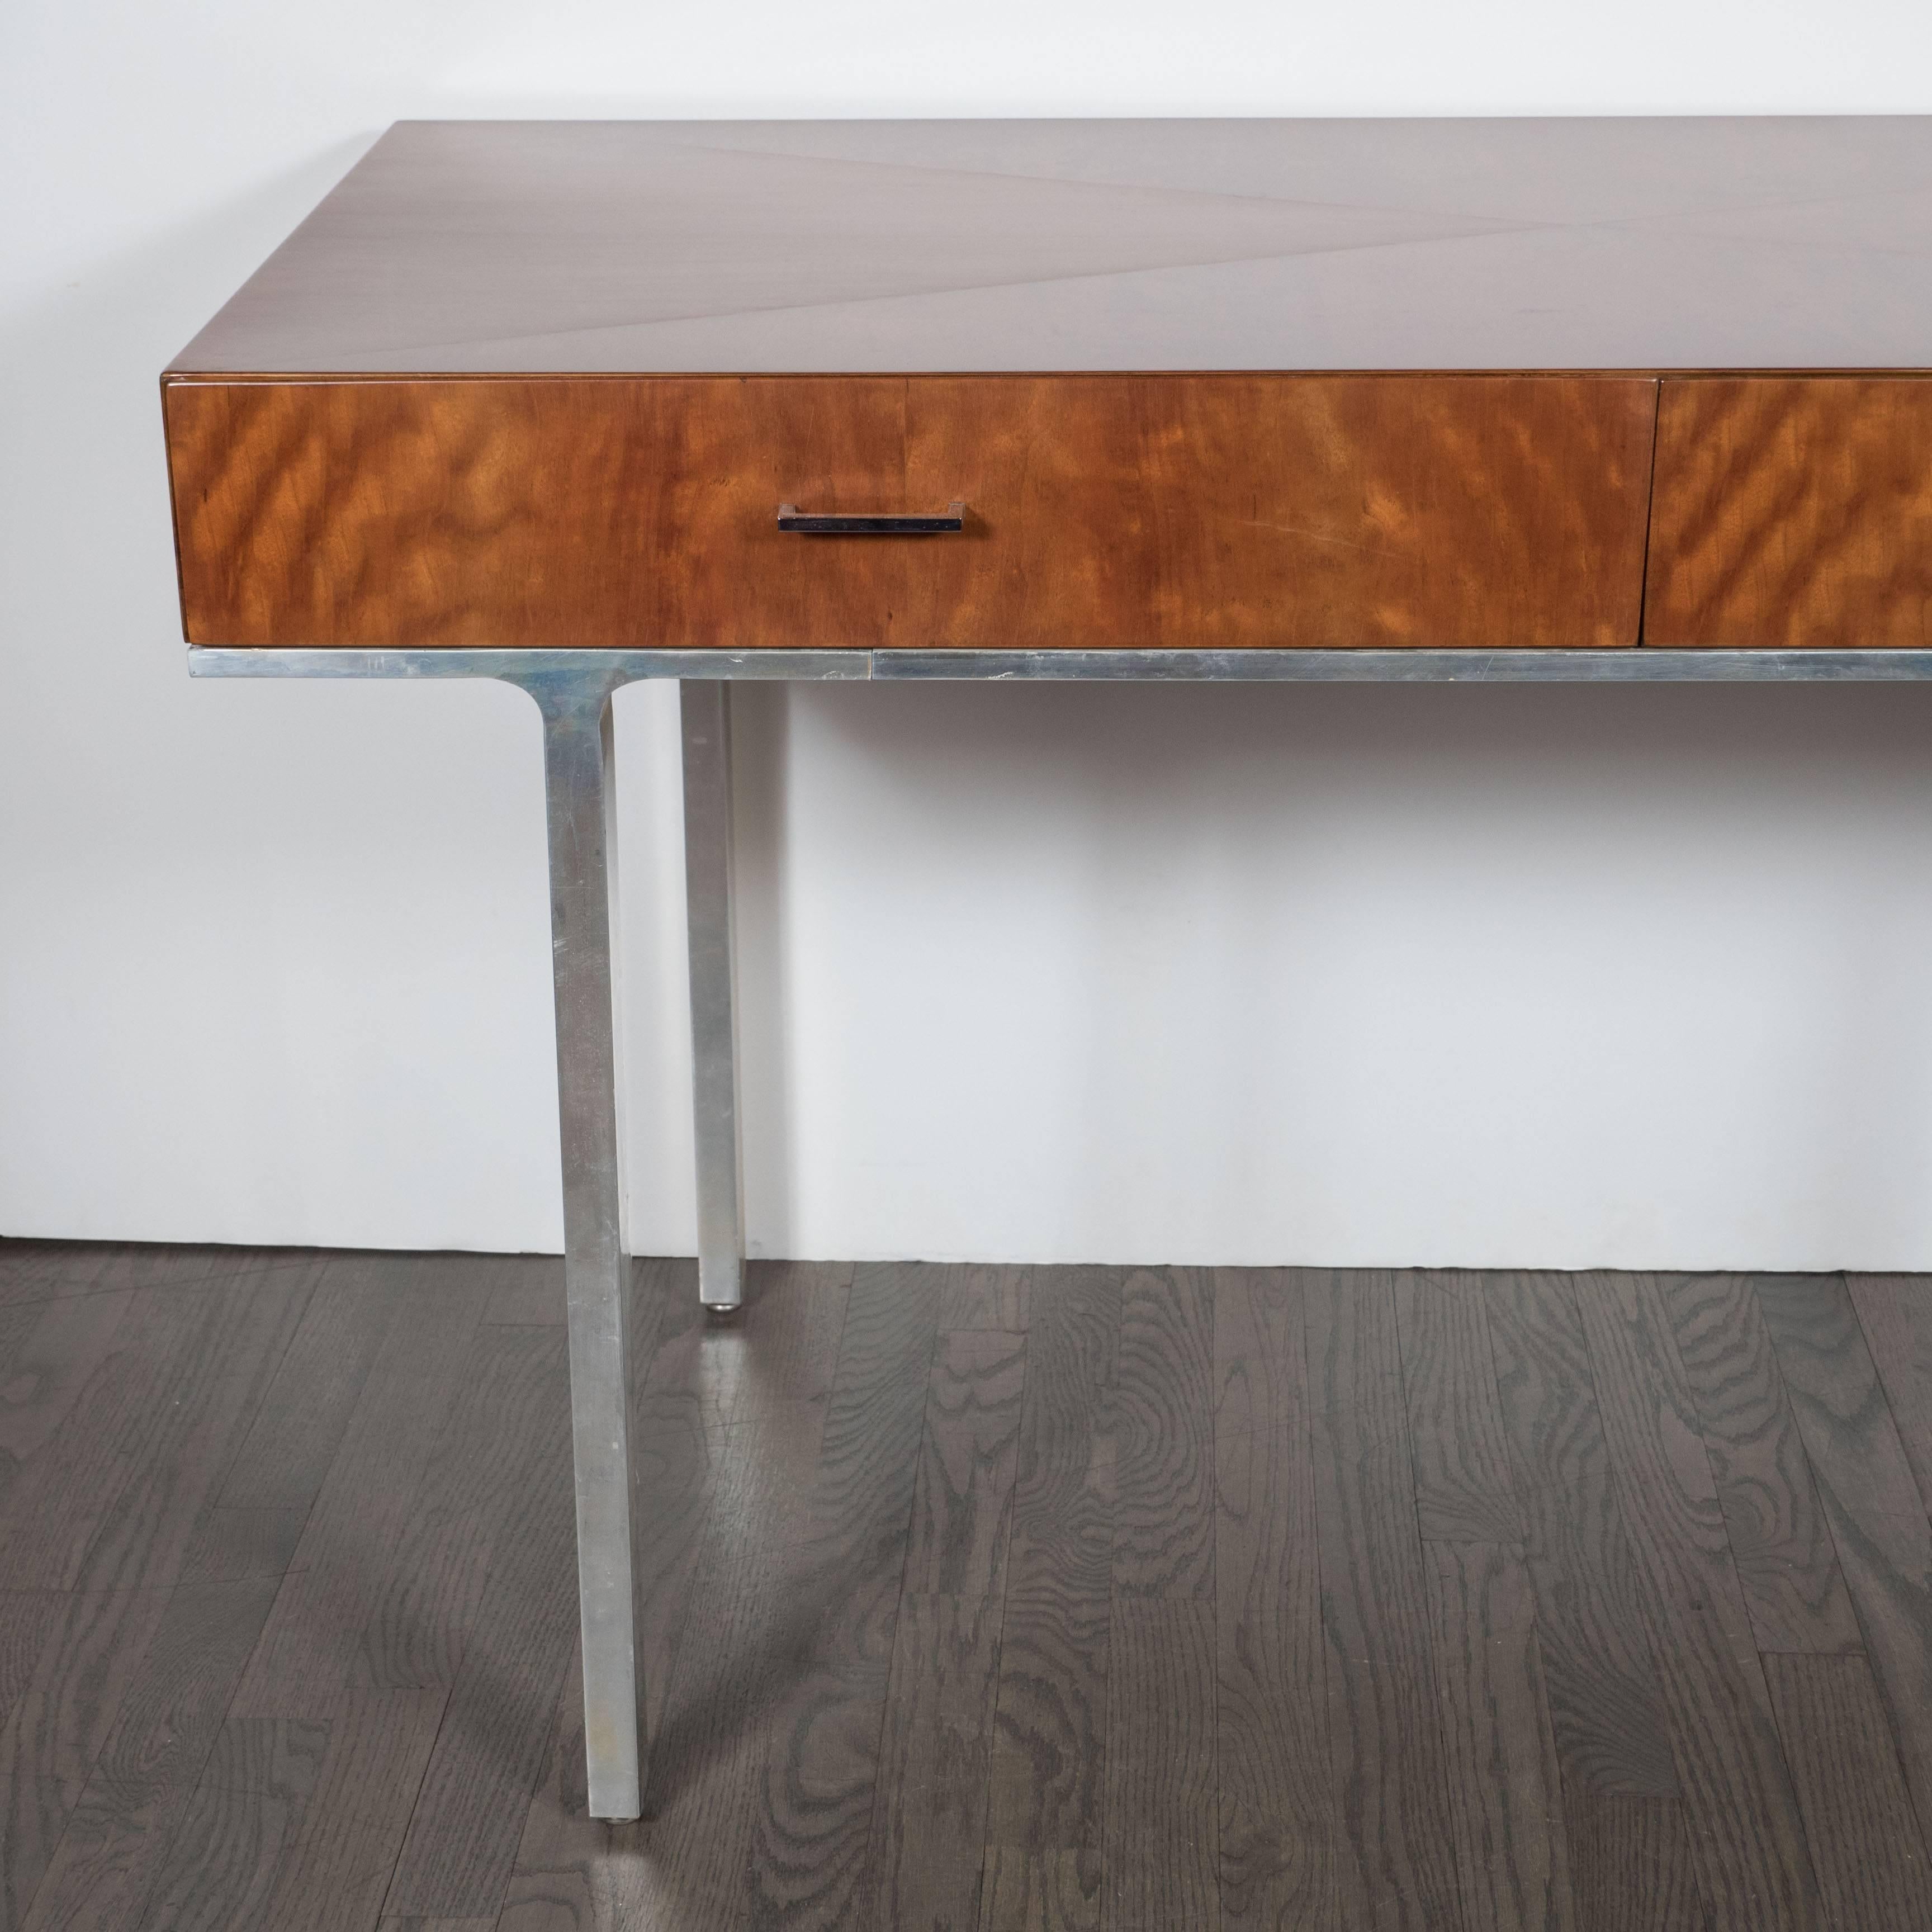 A stunning Mid-Century Modern desk in polished aluminum and bookmatched walnut, the tabletop is decorated with beautiful geometric triangular patterns, the grain of the bookmatched walnut is well defined, the two drawers are attrively finsihed with